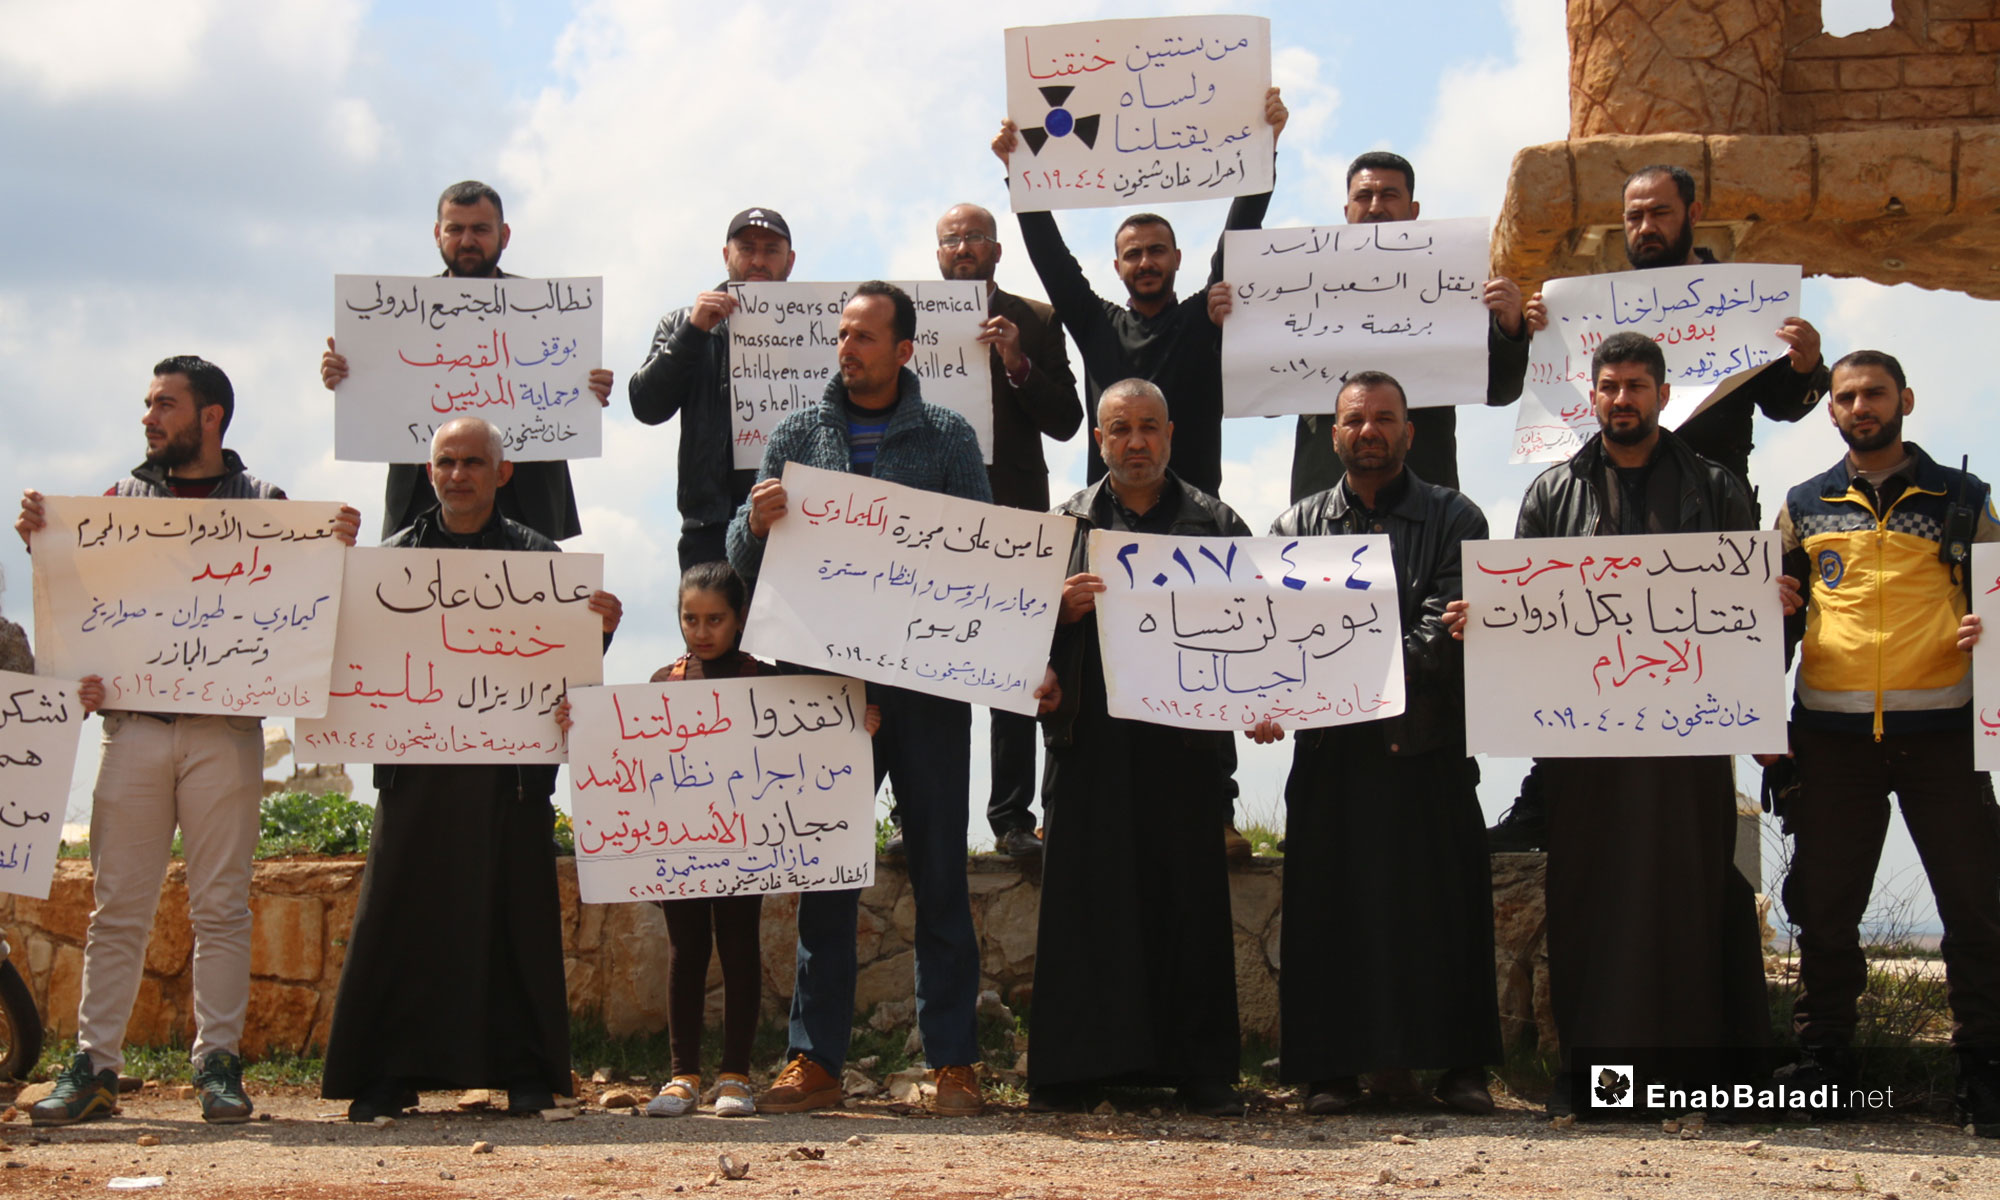 A vigil at the second anniversary of the chemical massacre of Khan Shaykhun, rural Idlib – April 4, 2019 (Enab Baladi)
The signs held by the people say: “Suffocated, burnt and mutilated, are there any death methods left that you have not tried yet; hold al-Assad accountable, chemical weapons  Khan Shaykhun/ Al-Assad is a war criminal, killing us with all the tools of crime/ two years ago, he suffocated us, and he is yet killing us/ 04.04.2017 is a day that our generations will not forget/ Bashar al-Assad is killing his people with an international license/ Two years have passed since the chemical weapons’ massacre and the massacres of the Russians and the regime are yet going on/We demand that the international community stop the shelling and protect the civilians/ Save our childhood from the criminality of the al-Assad regime; Massacres by al-Assad and Putin are continuing/ Two years have passed since we were suffocated and the criminal is still free/The tools are many and the criminal is but one; chemical weapons, aircraft, missiles, and the massacres are still going on/We thank the heroes of the Civil Defense, they are what is left of the world’s humanity, the children of the city of Khan Shaykhun/He is making an art out of killing his people and has a plan to get back Golan/Two years have passed since our suffocation, and our children are still suffering the bitterness of daily shelling.”
